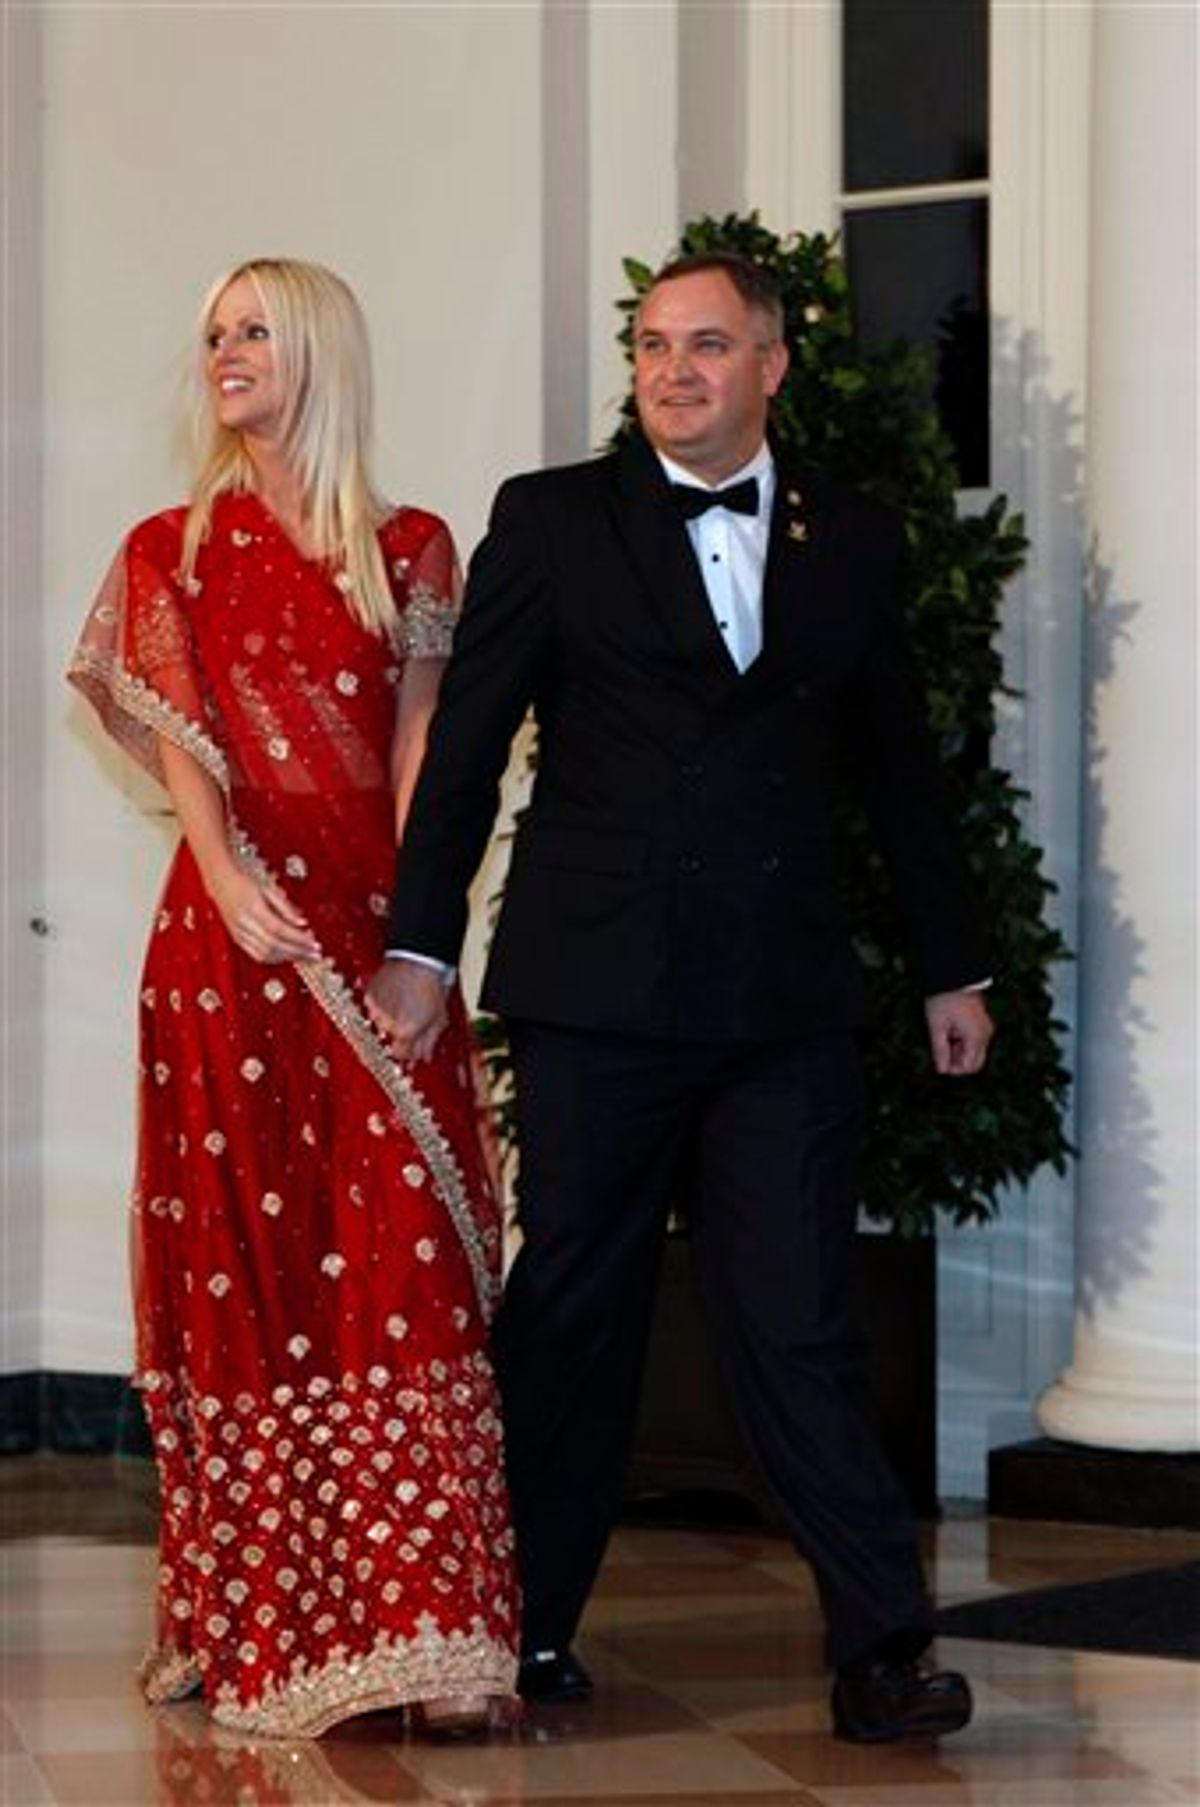 FILE - In this Tuesday, Nov. 24, 2009  file photo, Michaele and Tareq Salahi, right, arrive at a State Dinner at the White House in Washington. Salahi tells the AP in an interview that her new show, "The Real Housewives of D.C.," will show that she and her husband, Tareq, are "not just two people who went to a dinner."    (AP Photo/Gerald Herbert, file) (AP)